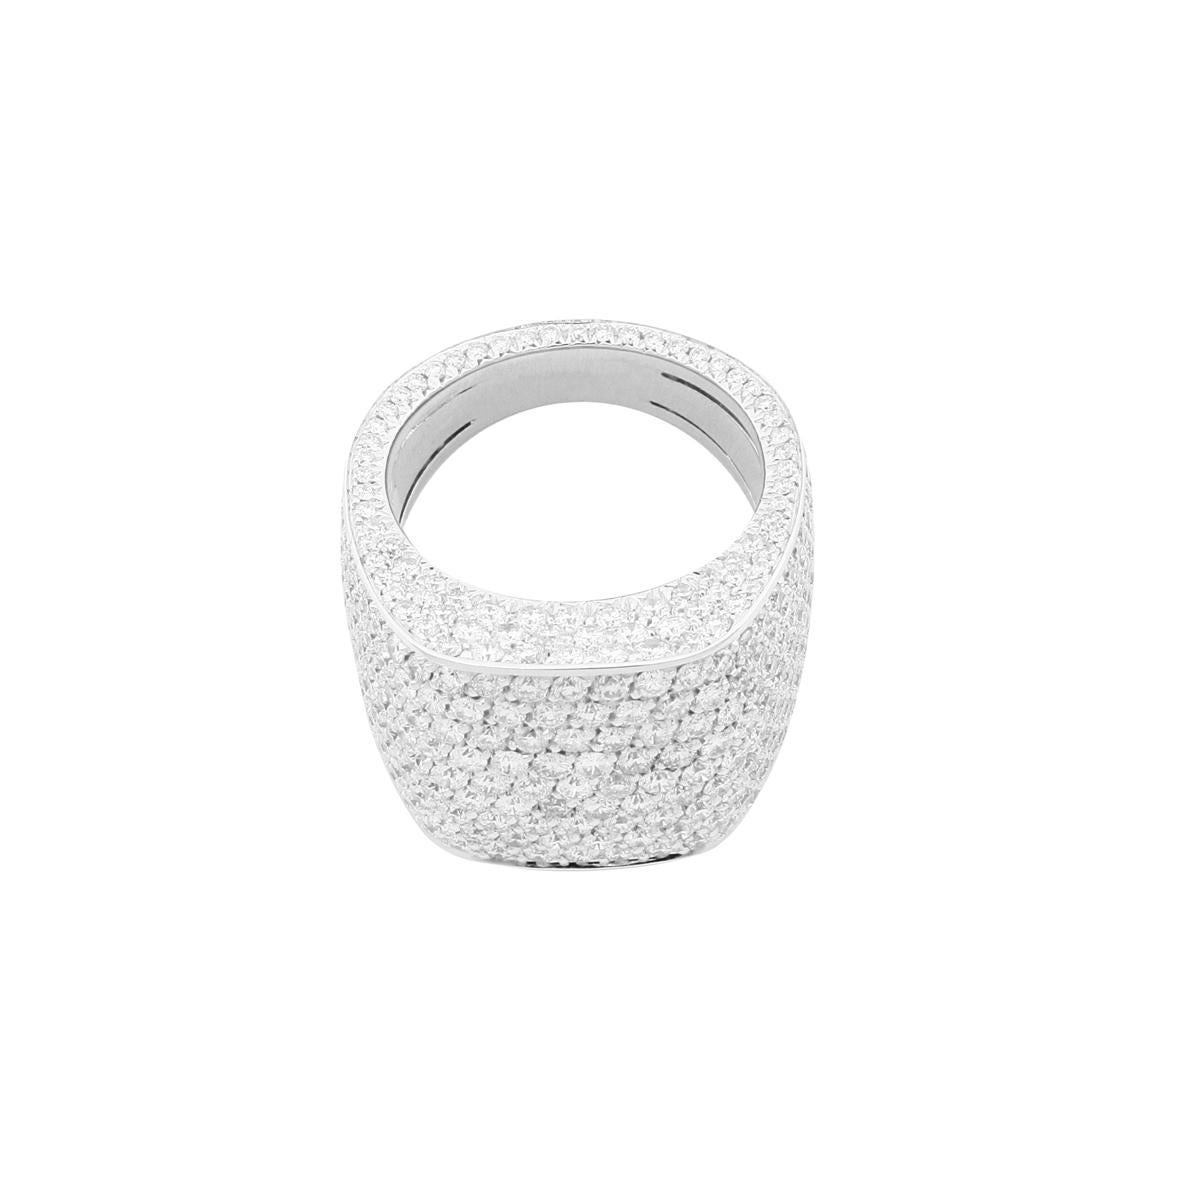 Brighten up the room with this stunning signet ring, designed and handcrafted by a talented artisan in Italy This chevalier ring is entirely covered in brilliant-cut white diamonds for a total of 5ct. Every stone is set by hand.
Originally,